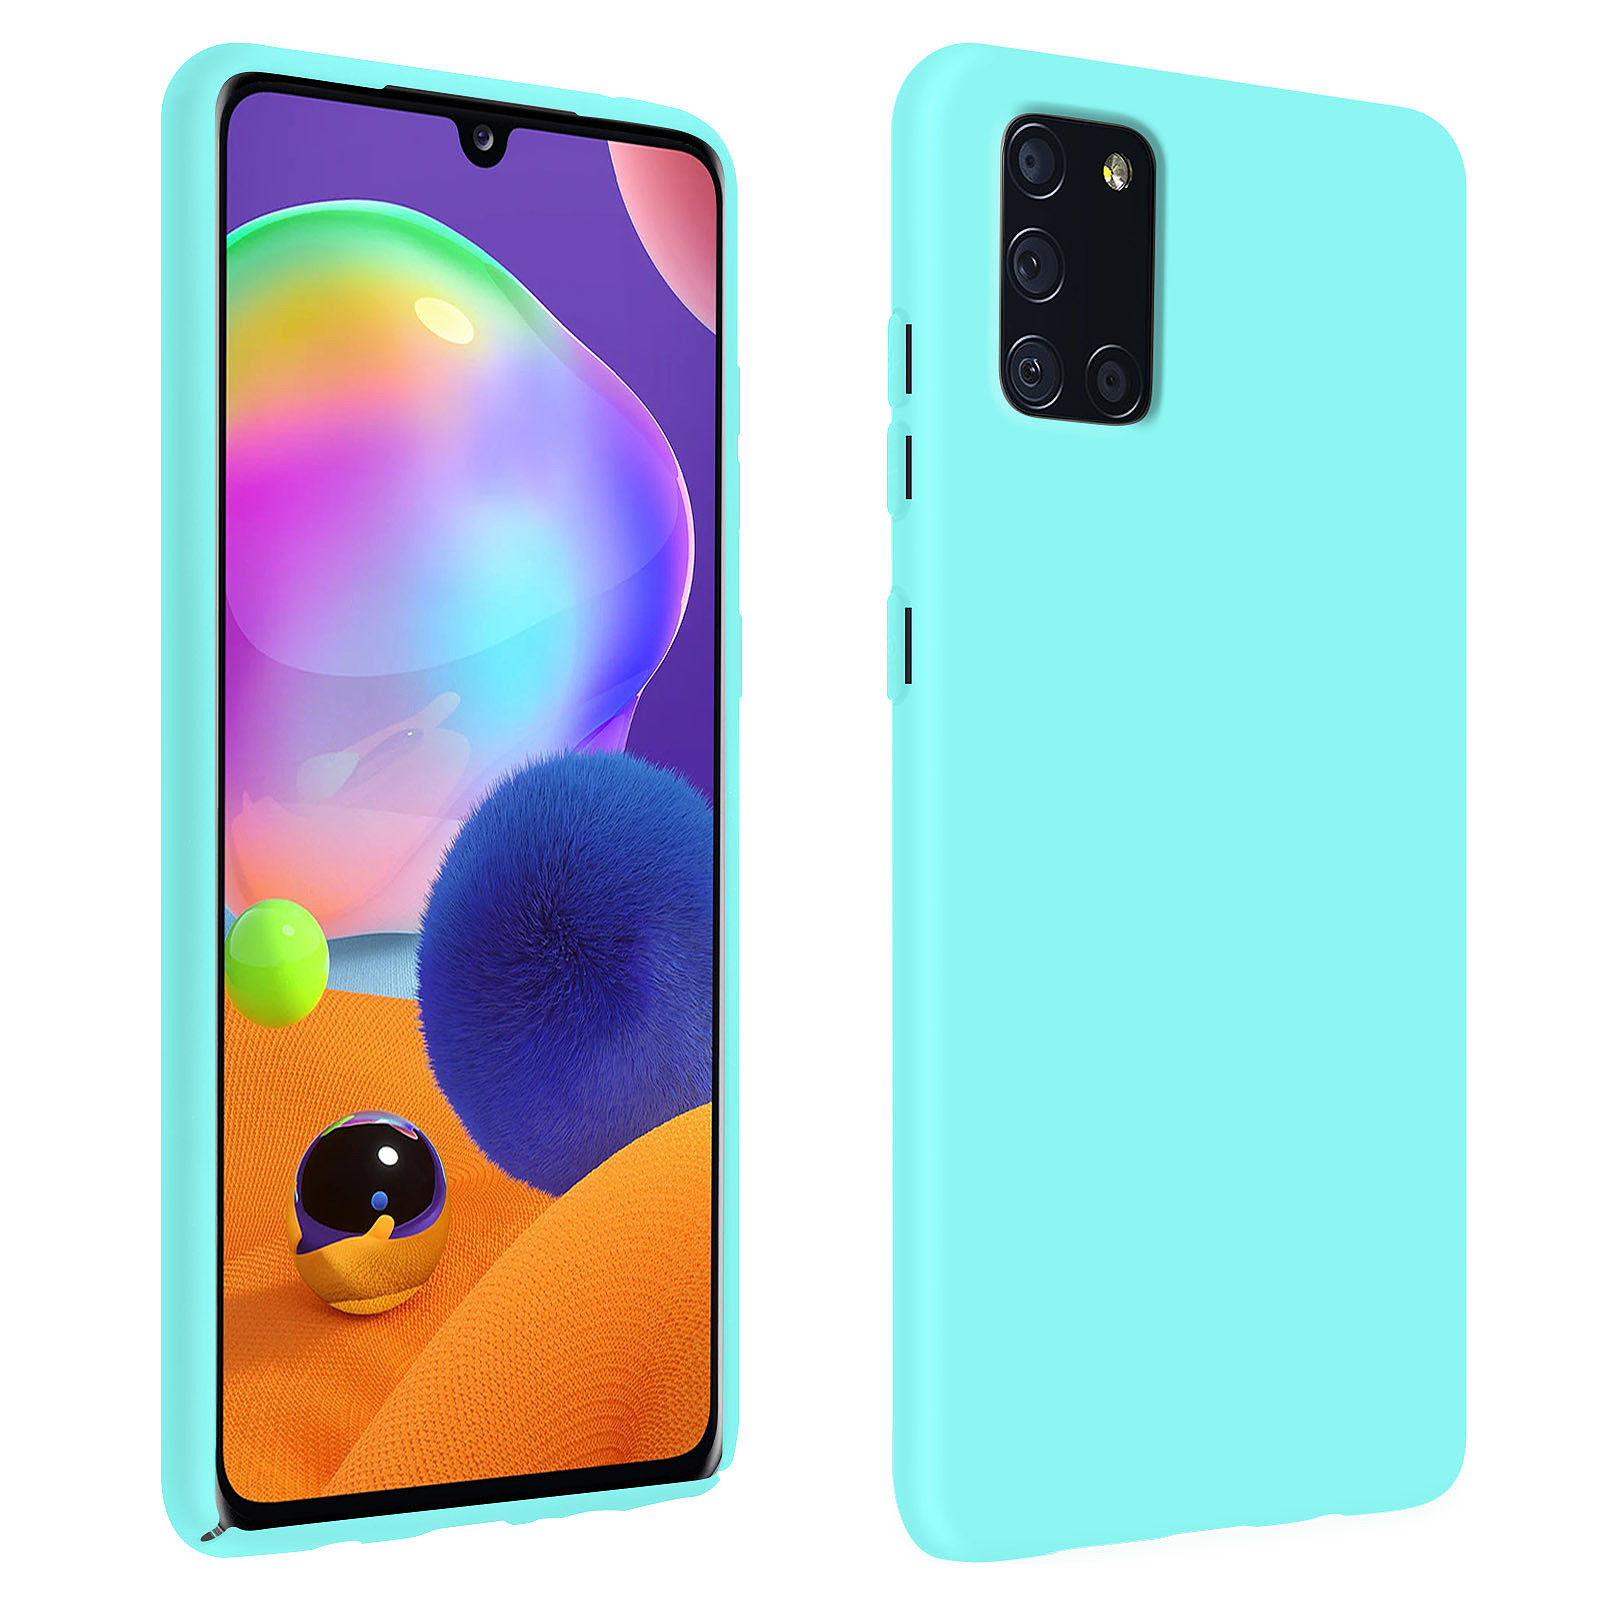 Avizar Coque pour Samsung Galaxy A31 Silicone Gel Souple Finition Soft Touch Turquoise - Coque telephone Avizar